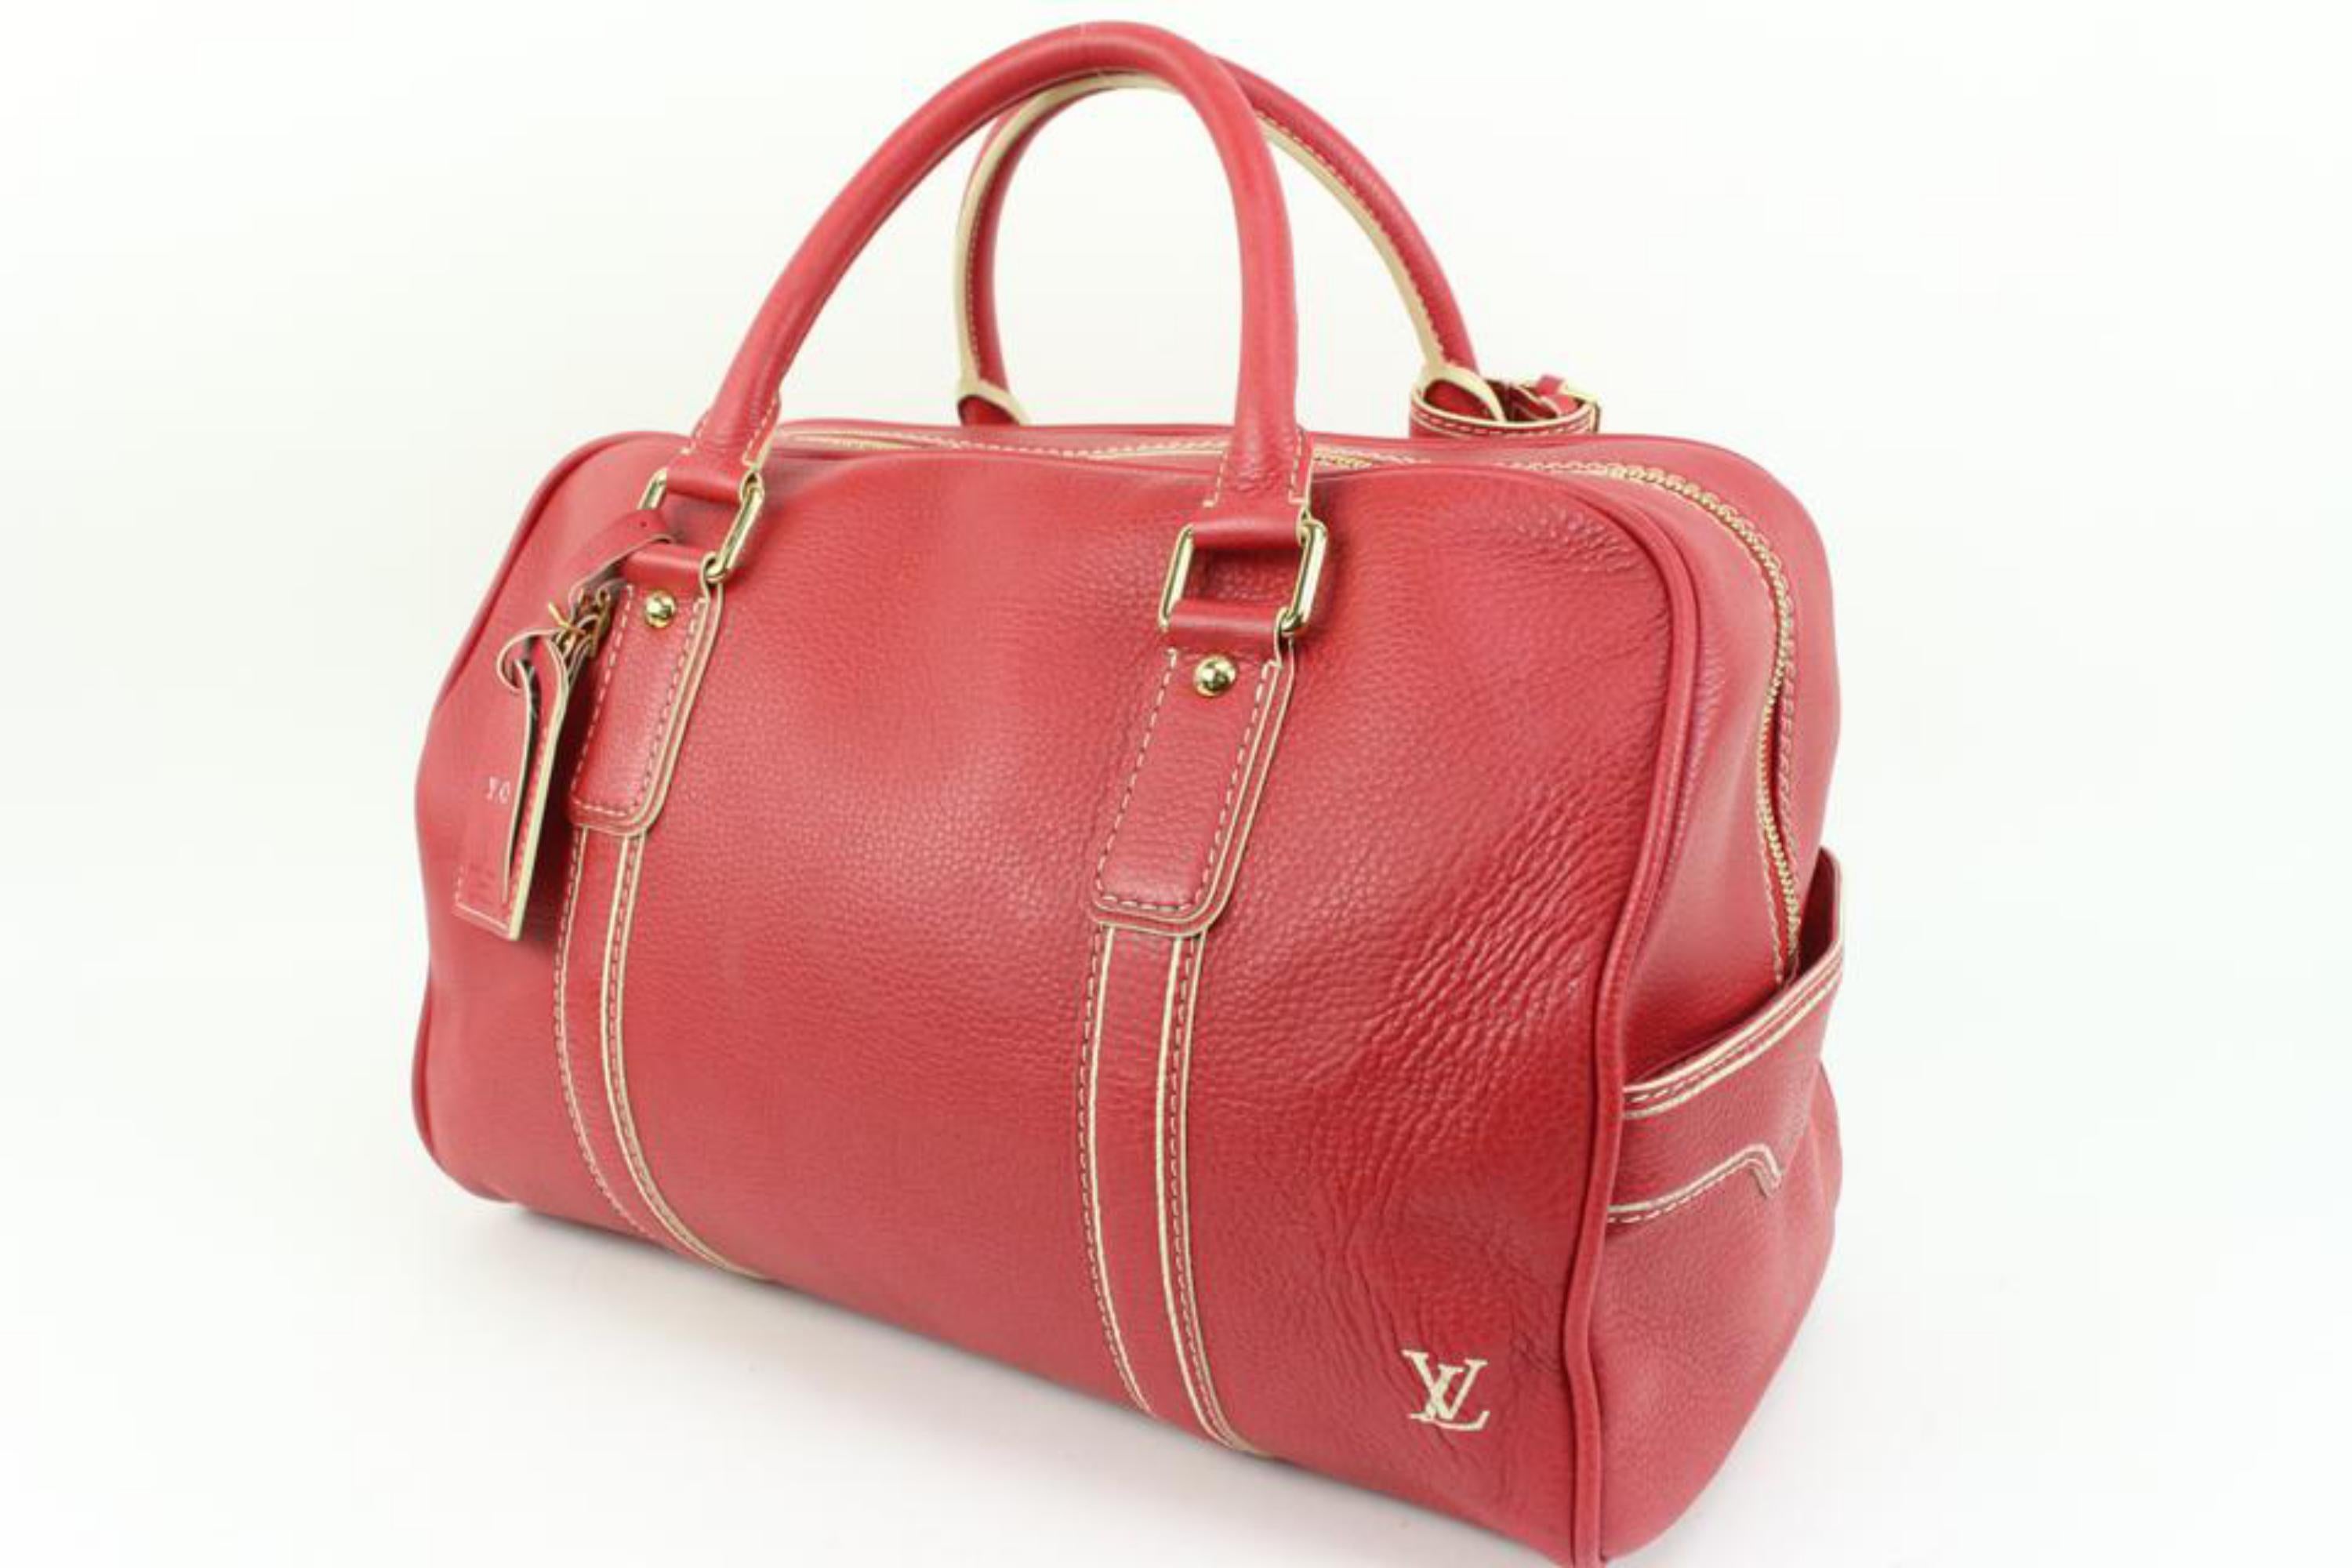 Louis Vuitton Red Tobago Leather Carryall Boston Duffle 40lk324s
Date Code/Serial Number: TH0016
Made In: France
Measurements: Length:  16